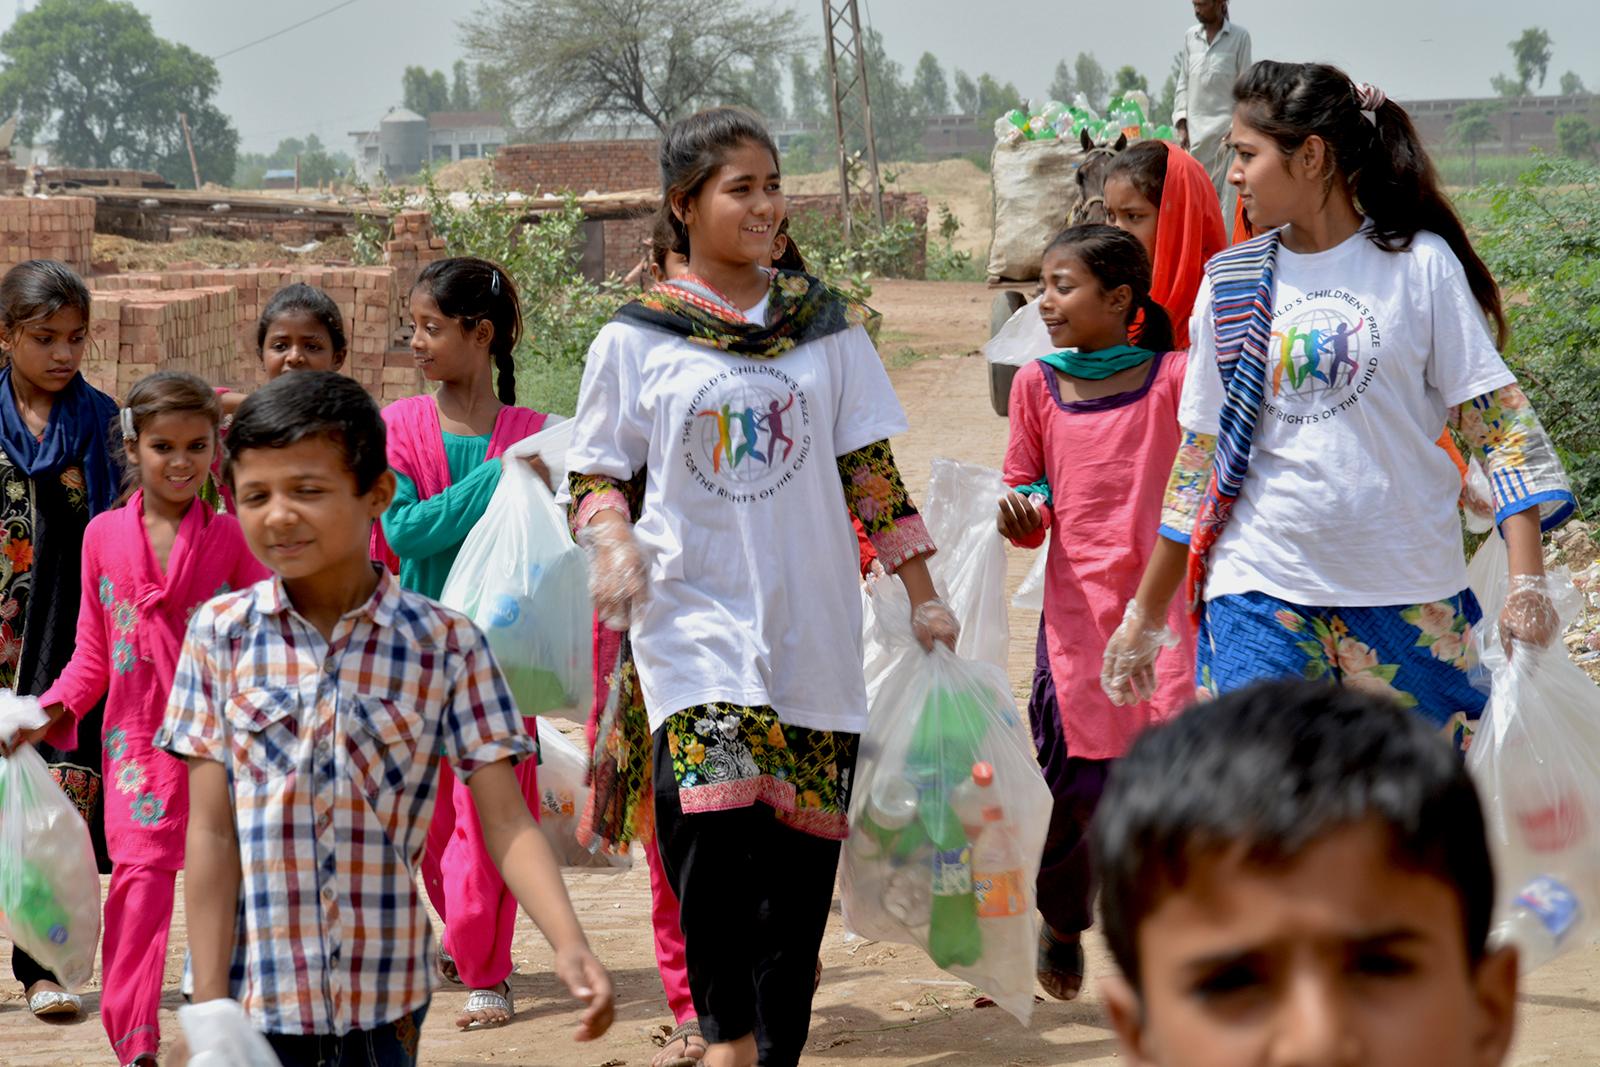 Children in different ages walking together, carrying plastic bags with litter 